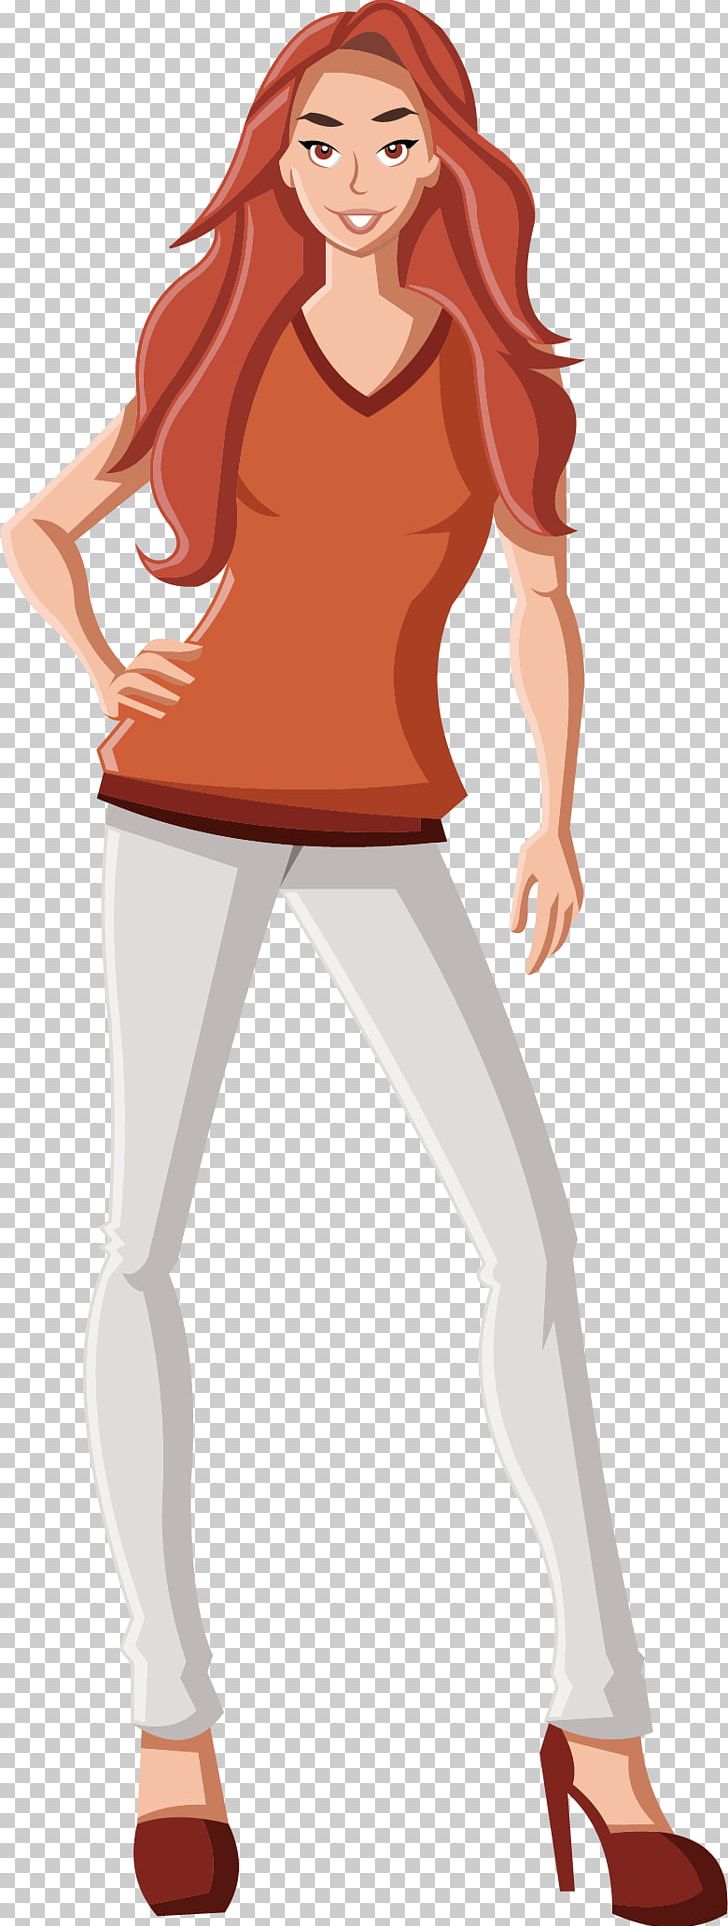 Long Haired Woman PNG, Clipart, Arm, Black Hair, Business Woman, Cartoon, Fictional Character Free PNG Download